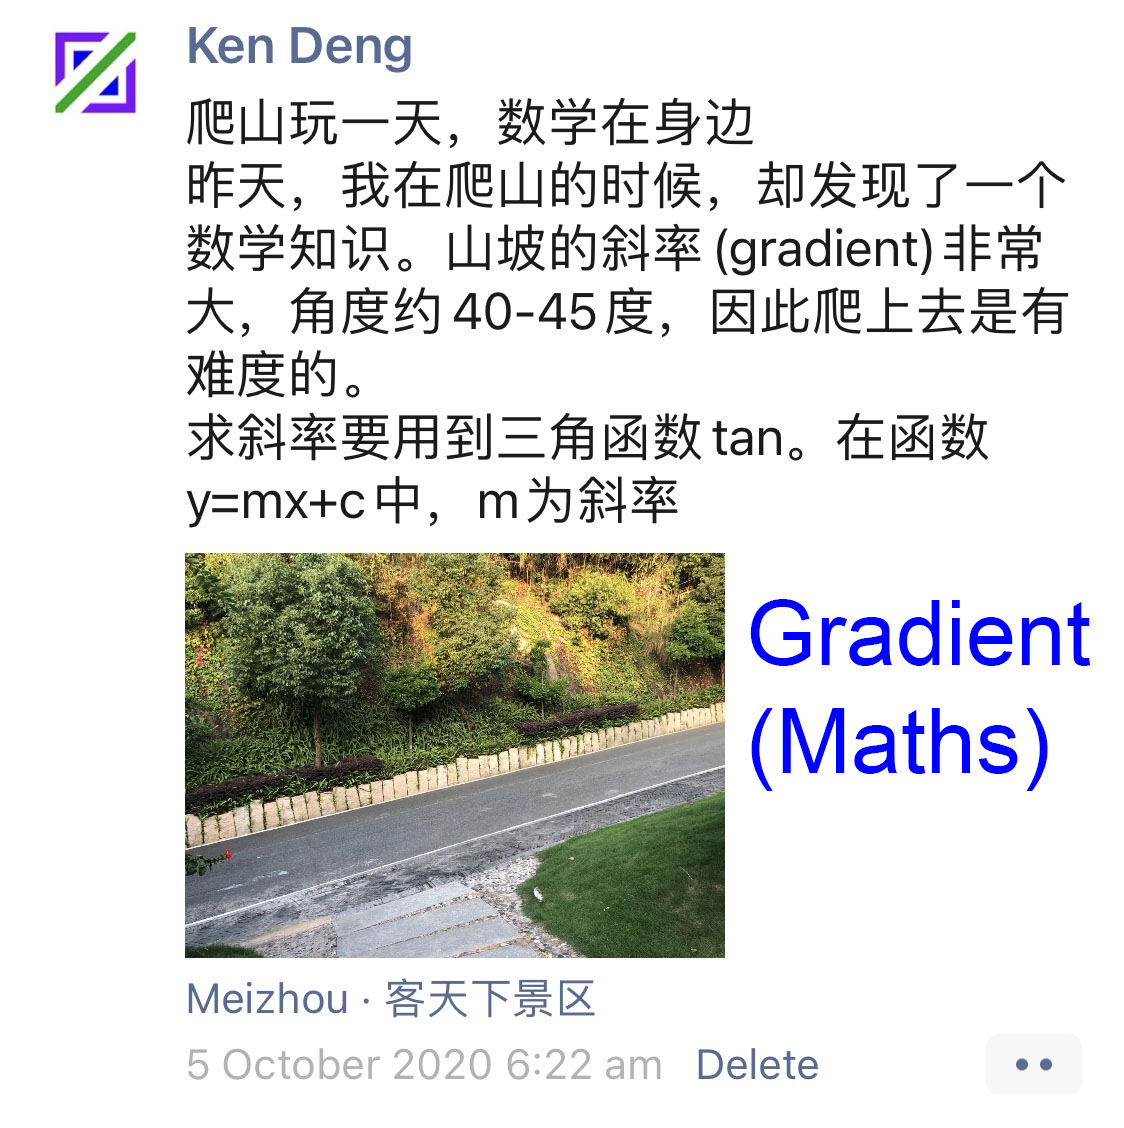 Knowledge on WeChat Moments: Gradient (Maths)